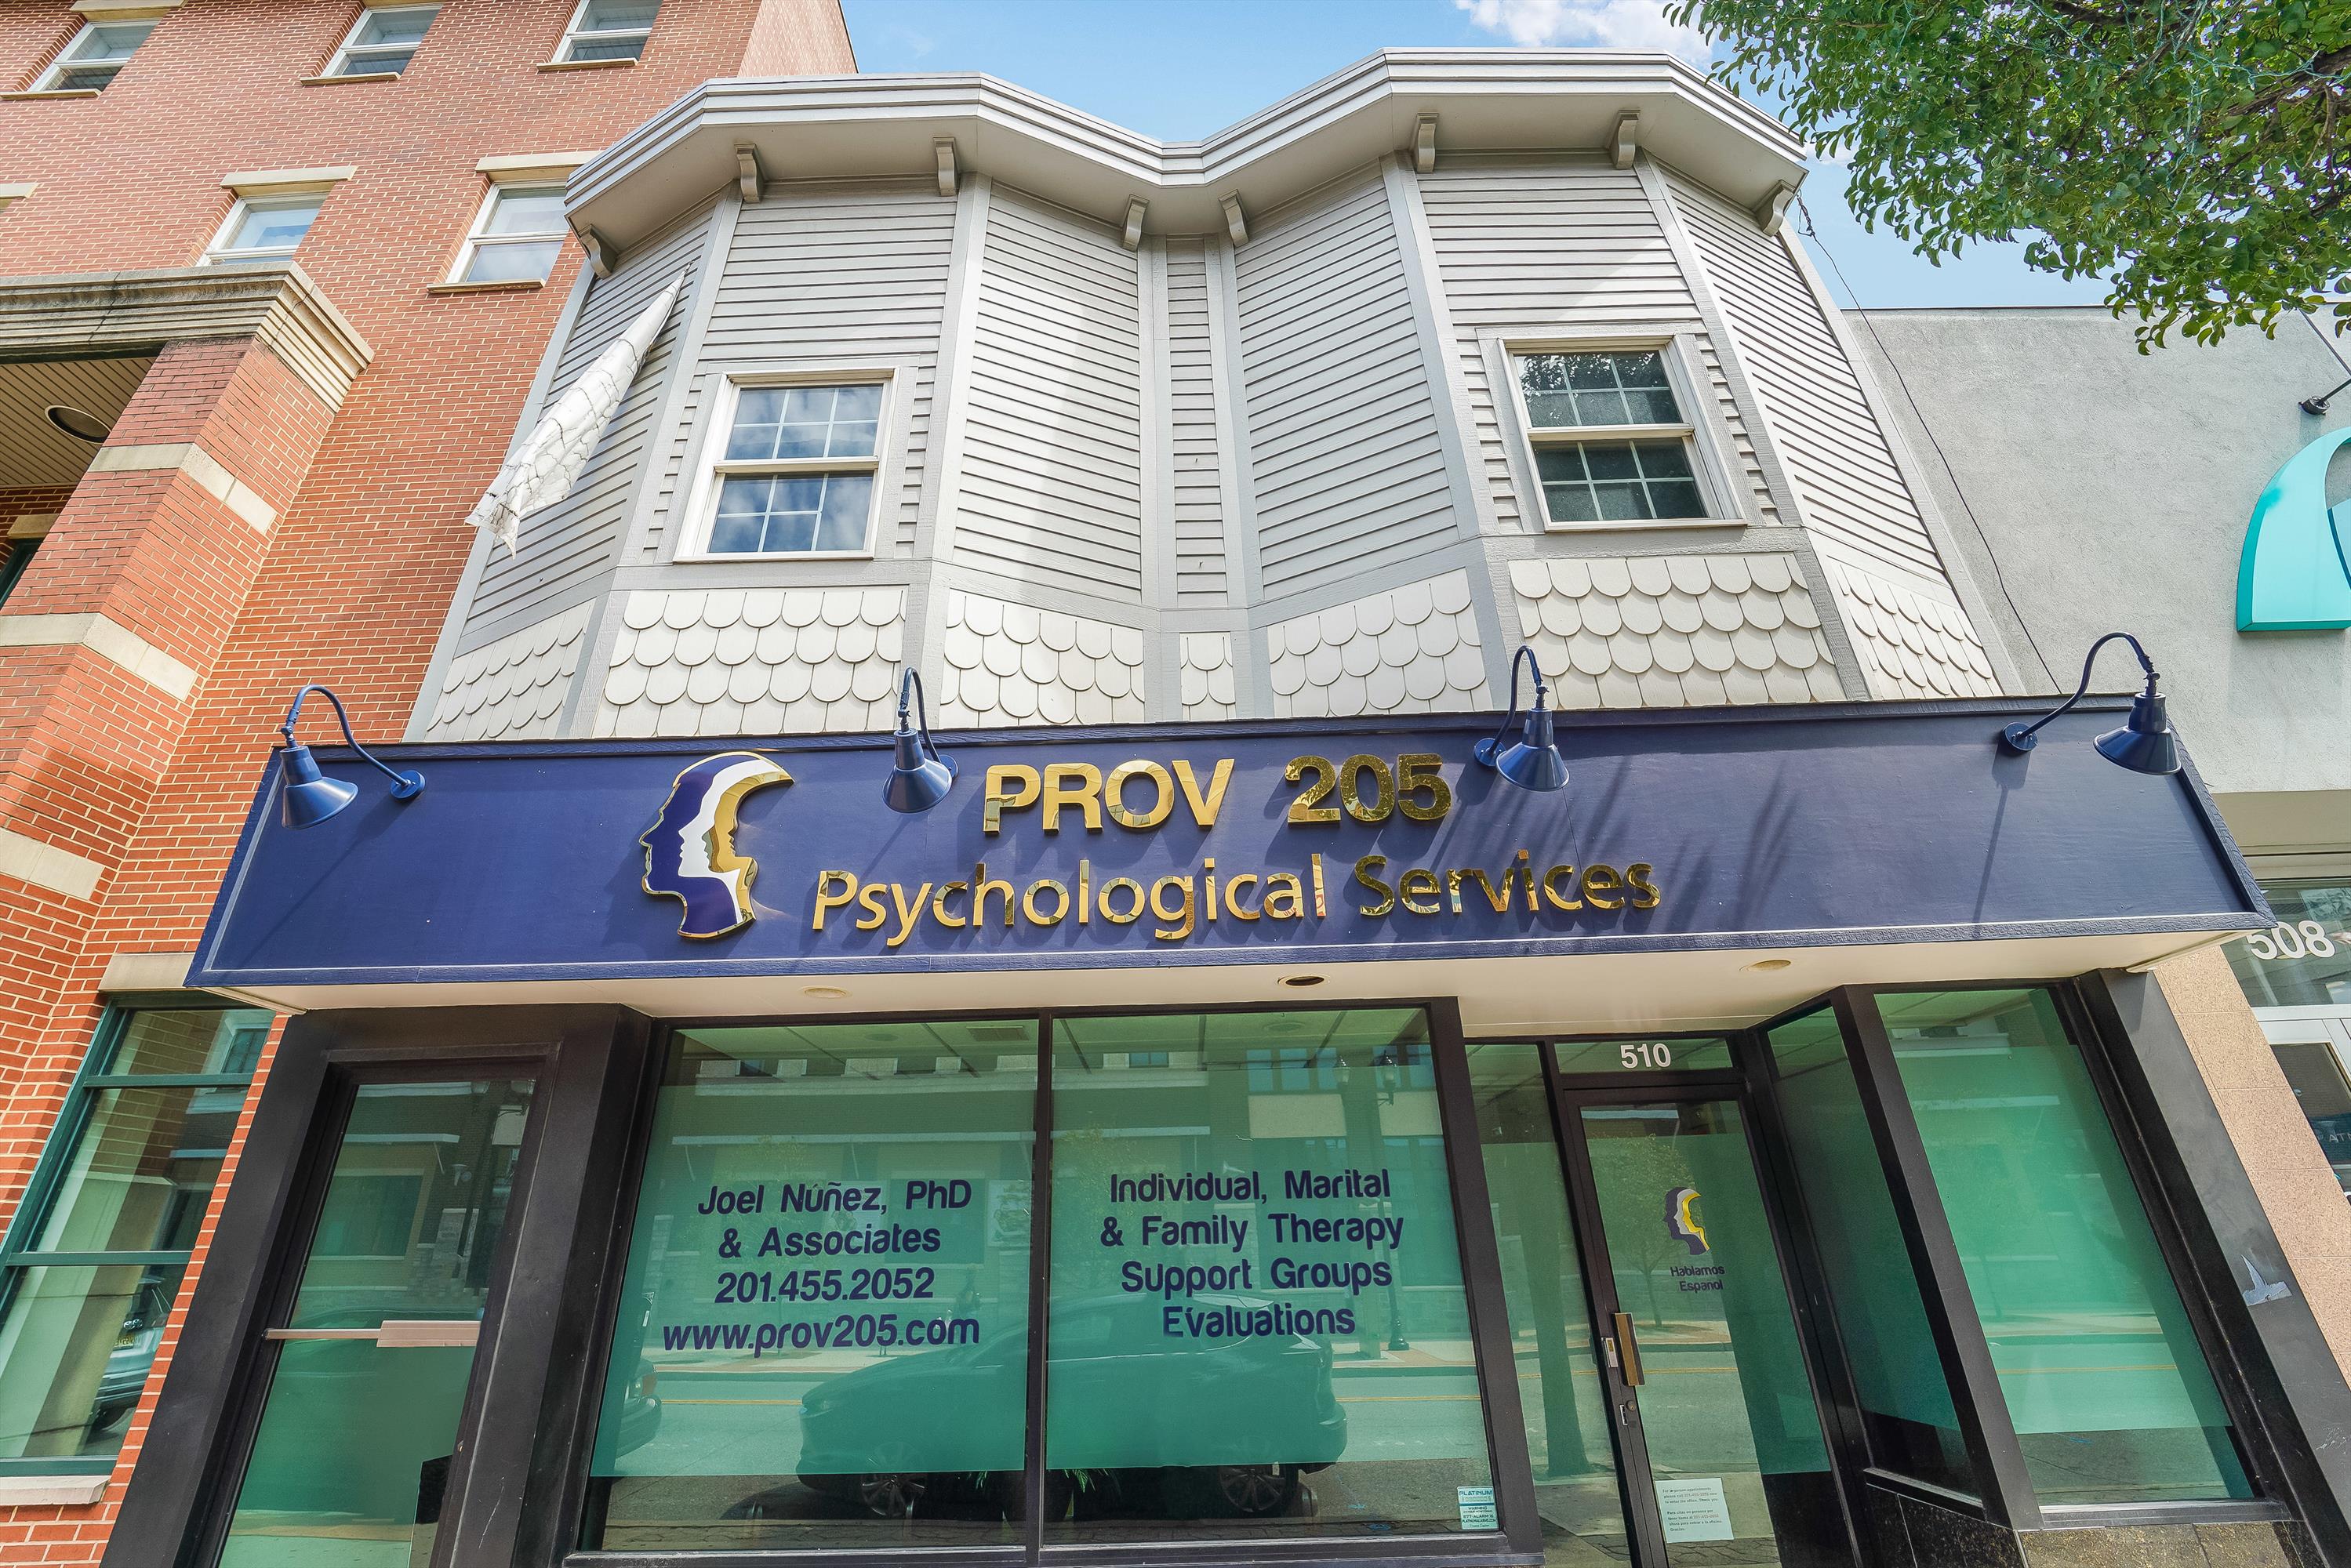 Location, location, location!!! 1700 square foot commercial space on located in the center of the bustling Broadway business district in booming Bayonne, New Jersey. Space is on 2nd floor with its own private entrance. Current layout has 4 offices and private bathroom. Tenants can customize to suit their needs. This great property offers heavy foot traffic, is close to other successful and well established businesses and restaurants, is close to the 22nd street LiteRail station, and all major forms of transportation.